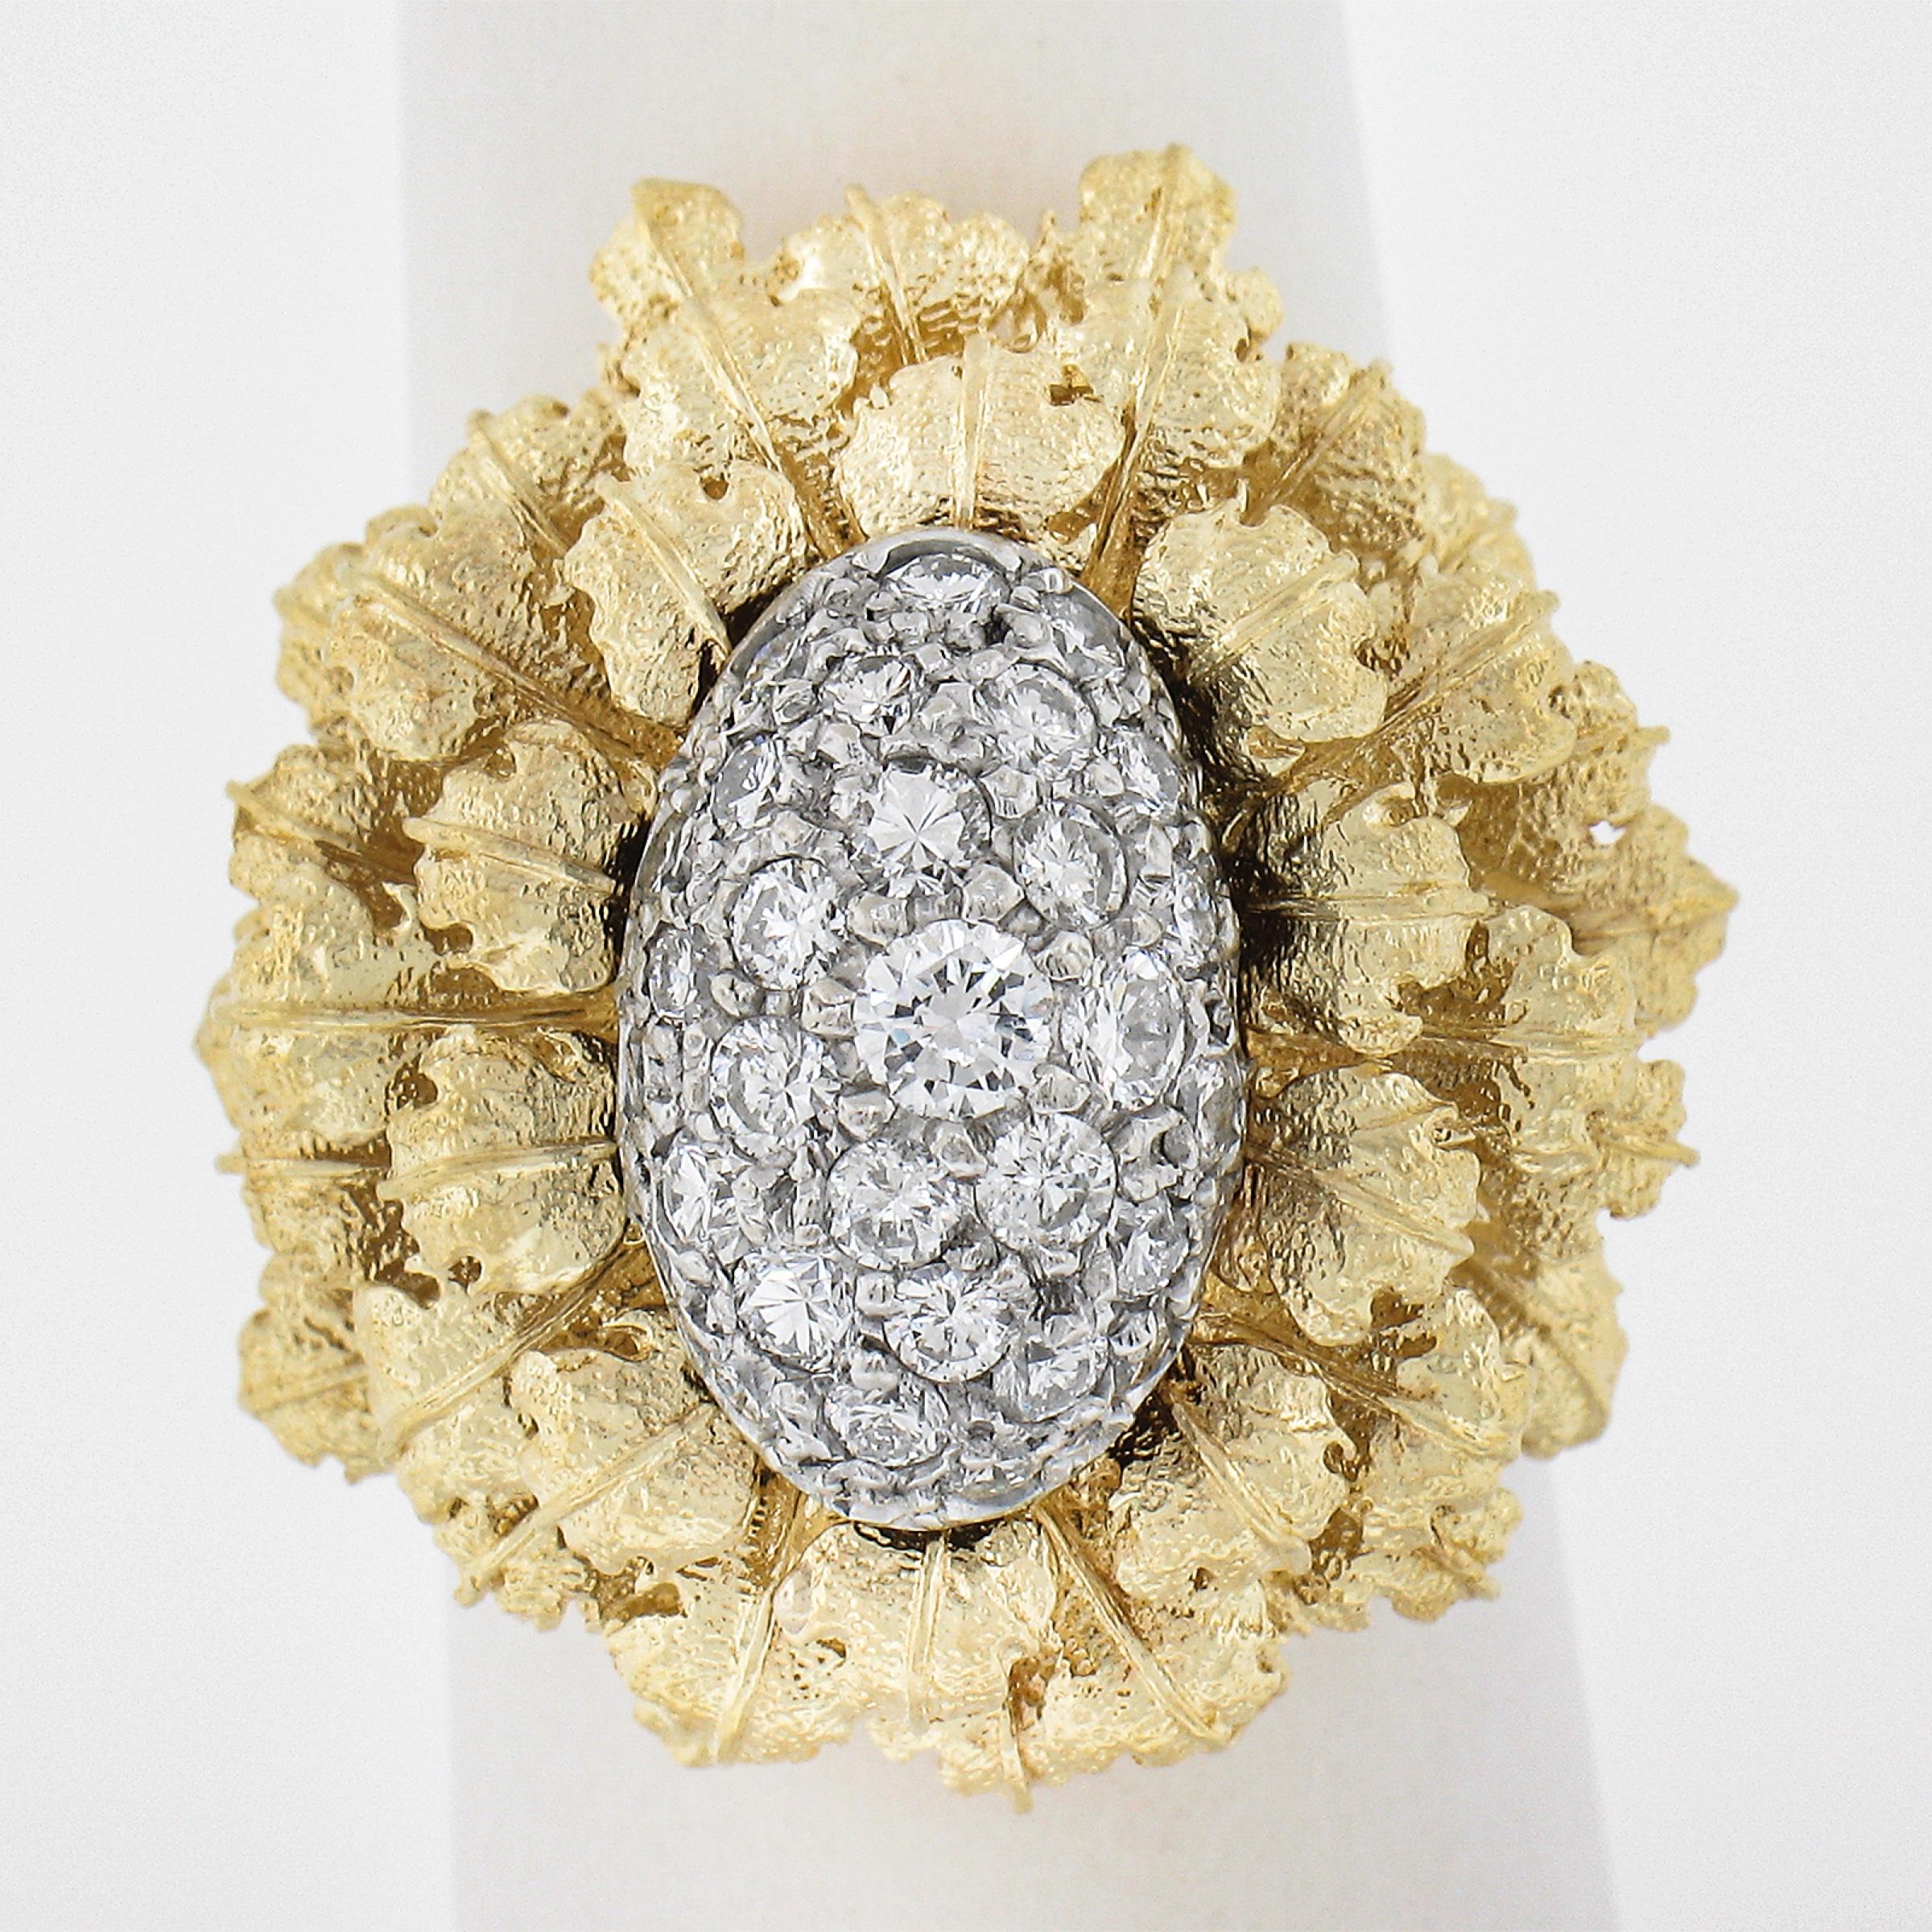 --Stone(s):--
Numerous Natural Genuine Diamonds - Round Brilliant Cut - Pave Set - G/H Color - VS2-SI2 Clarity - 0.75ctw (approx.)

Material: Solid 18k Yellow Gold w/ White Gold Center
Weight: 16.28 Grams
Ring Size: 6.5 (Fitted on a finger. We can